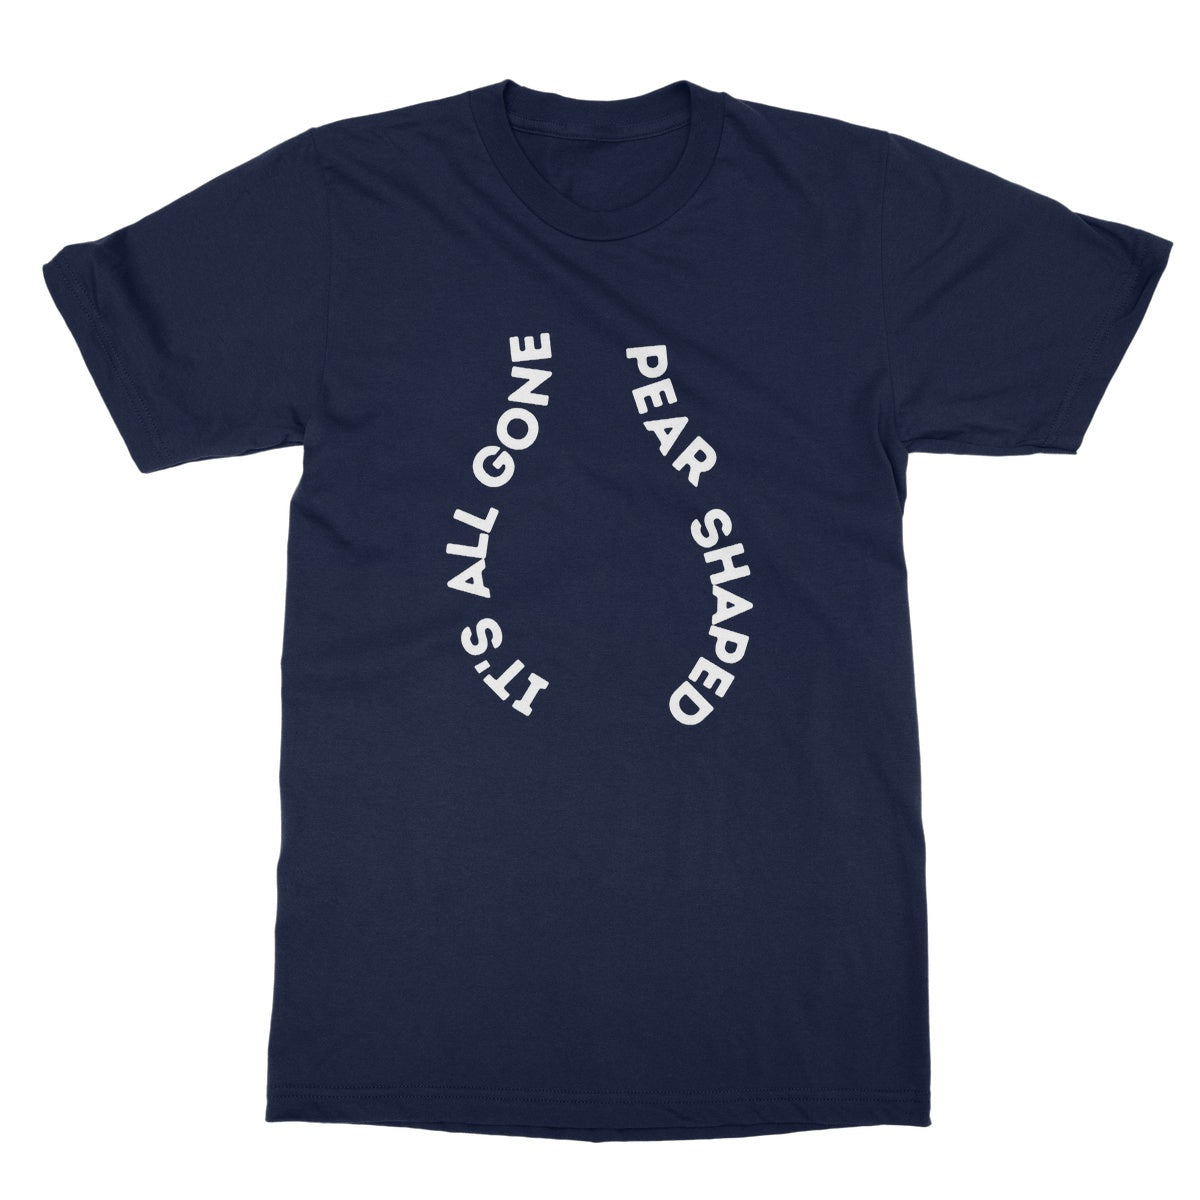 its all gone pear shaped t shirt navy